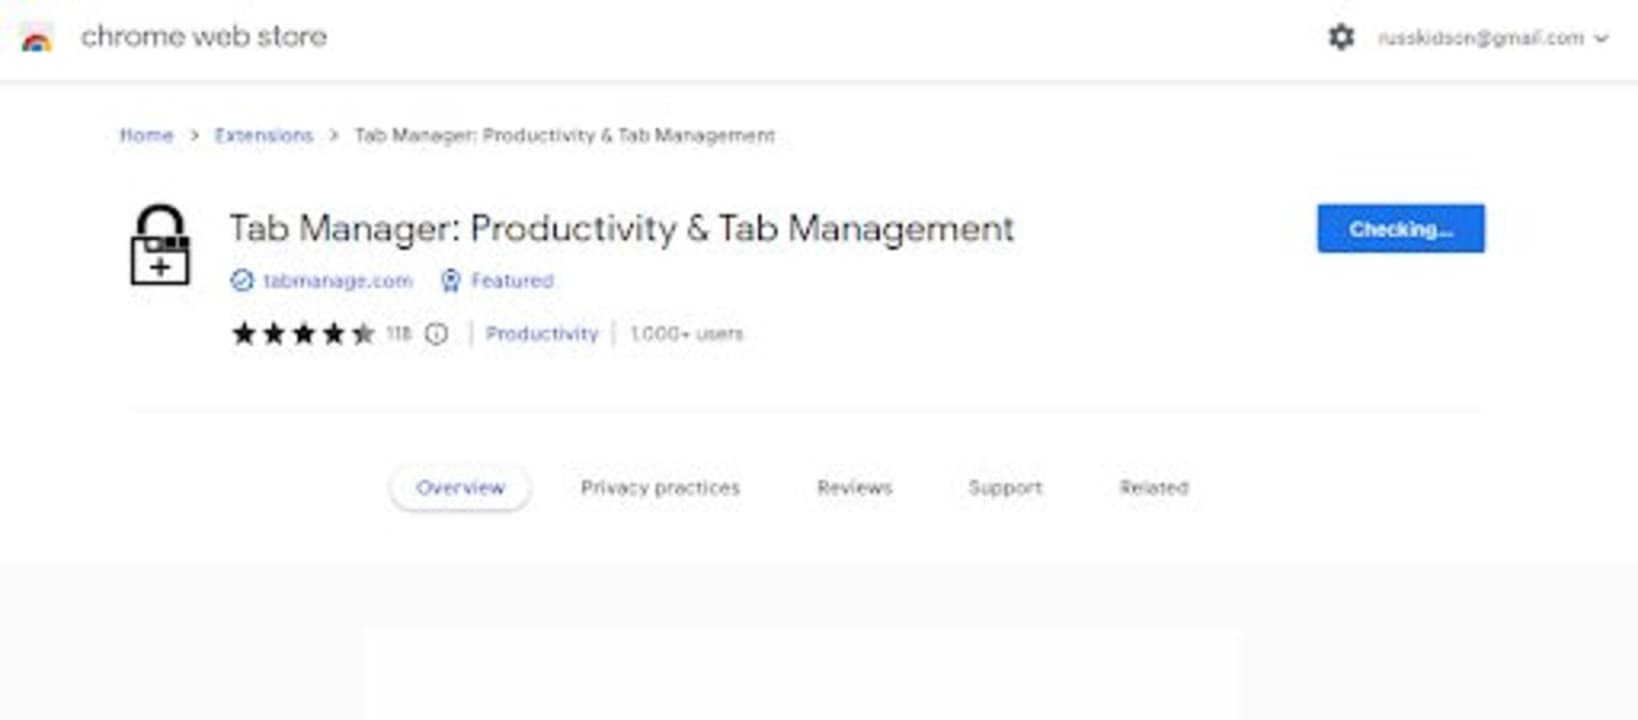 Tab Manager Productivity & Tab Management